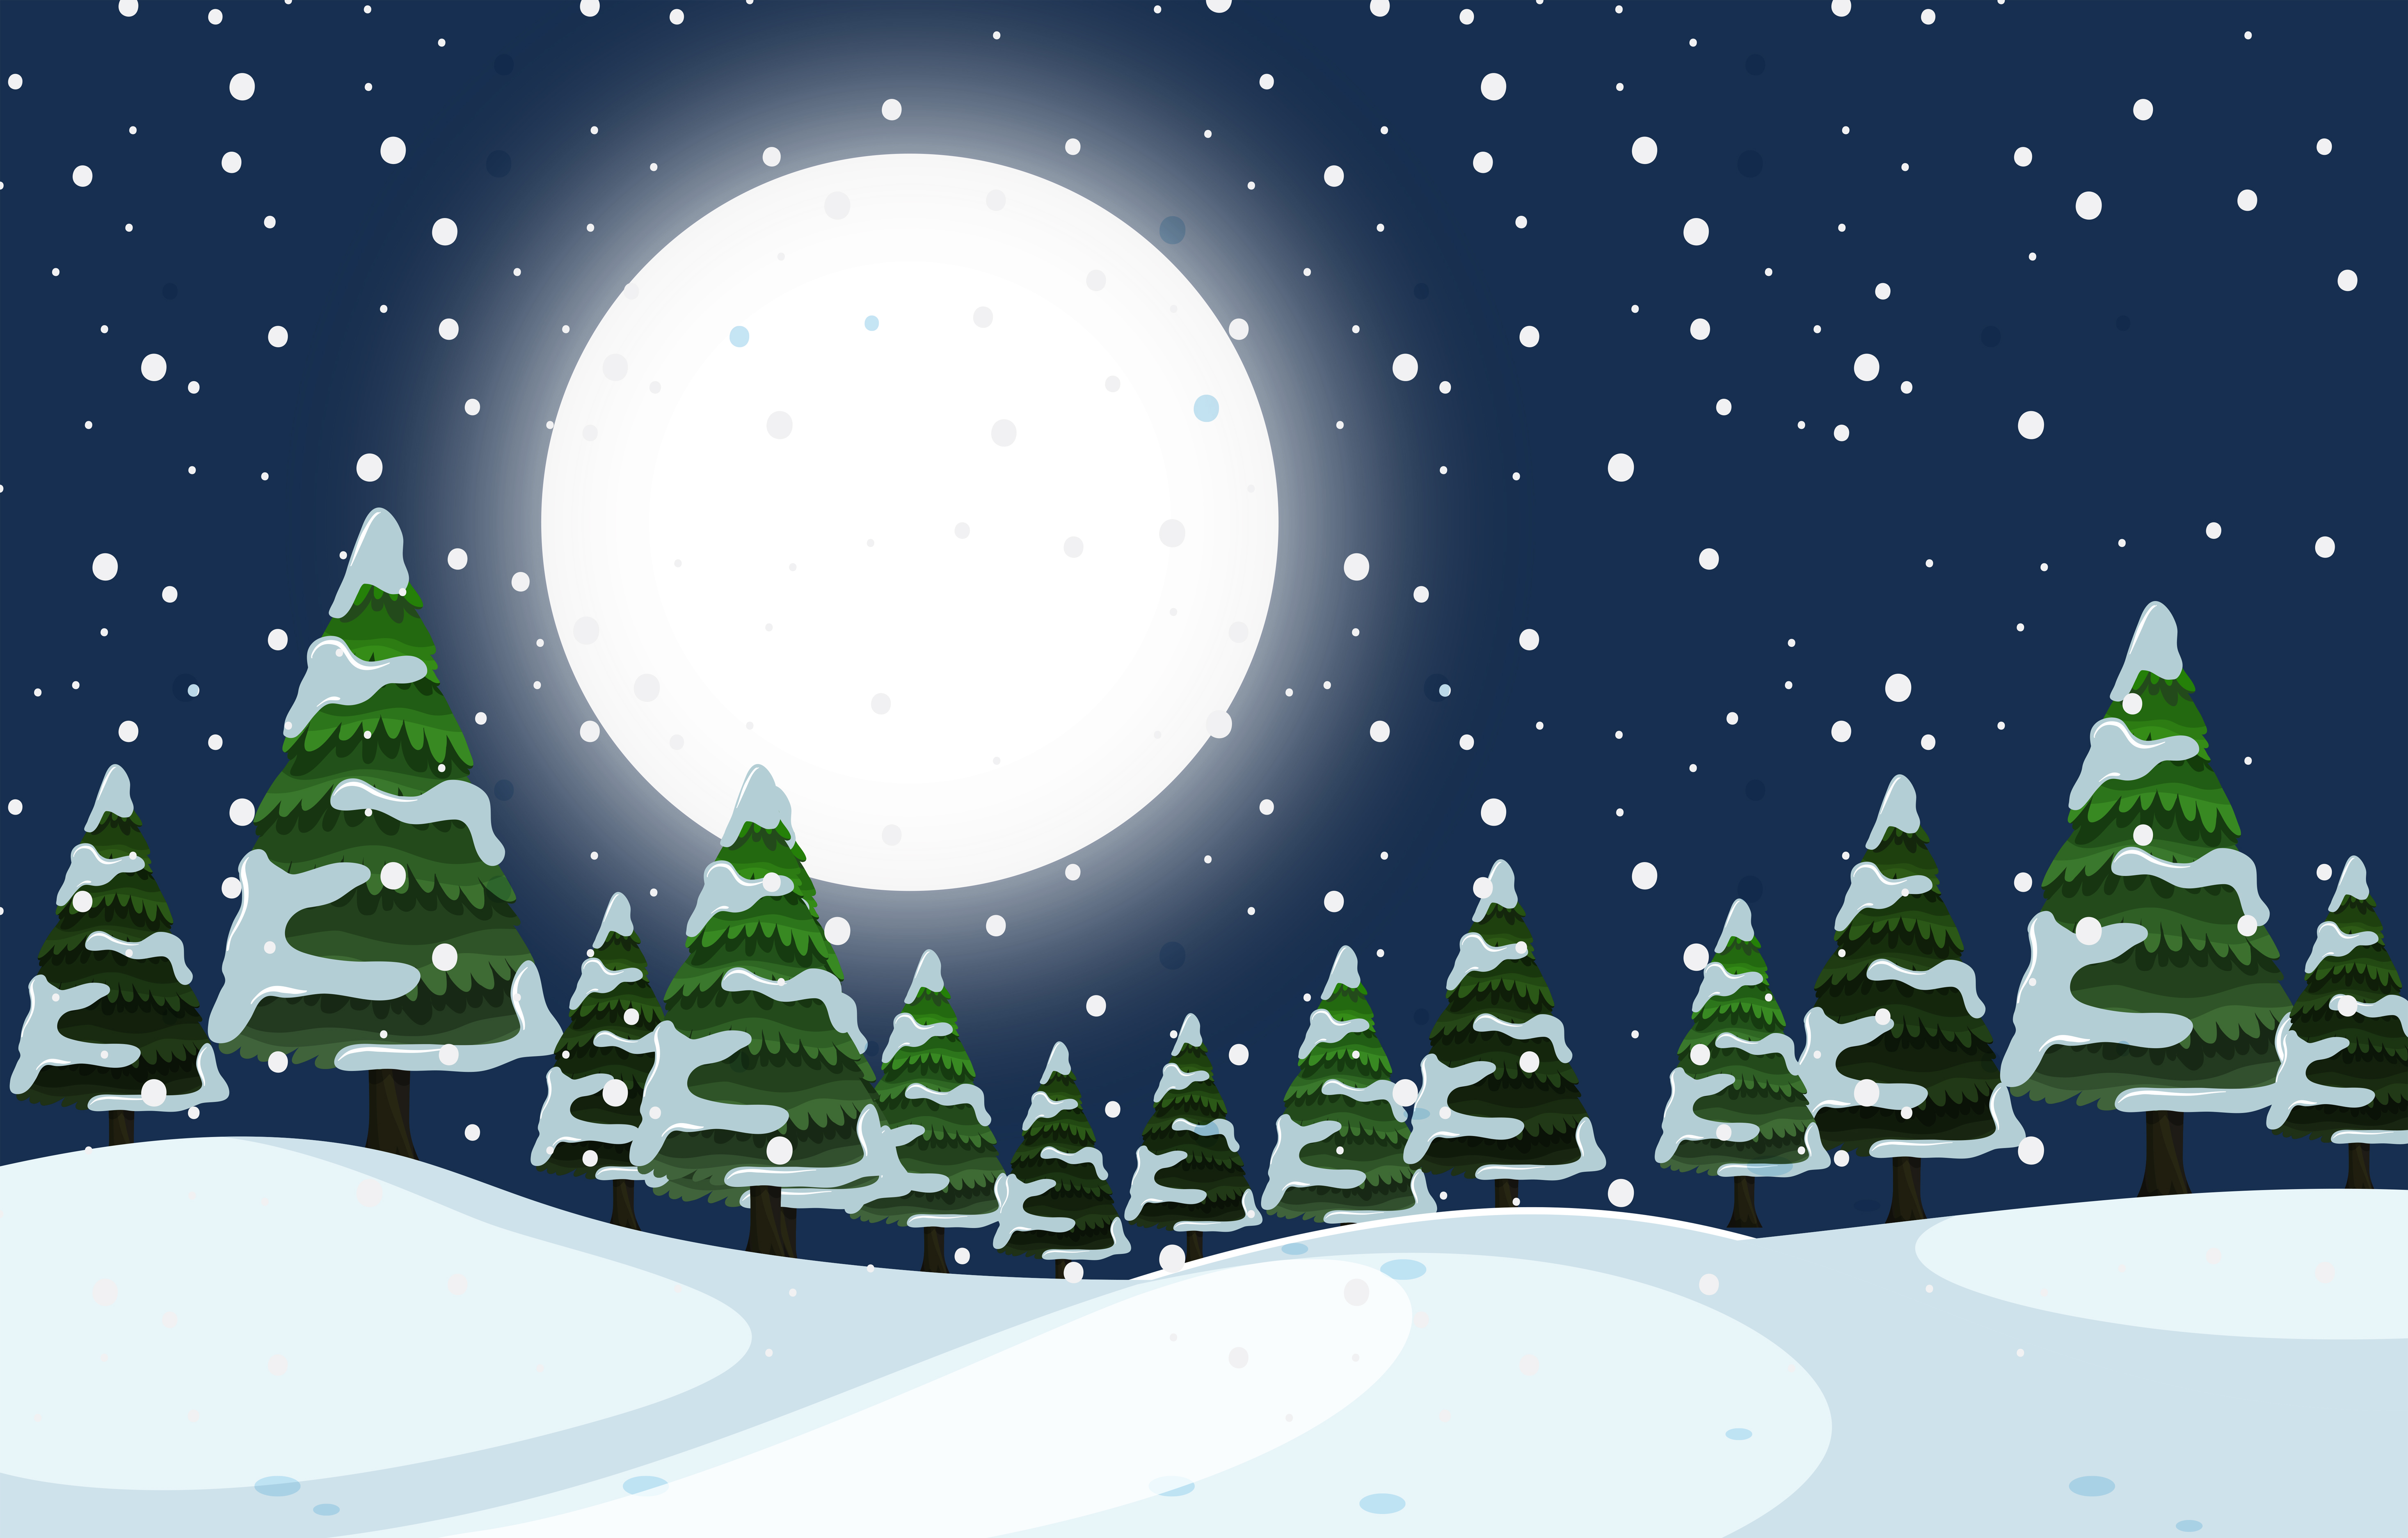 Download the A winter outdoor night scene 614491 royalty-free Vector from V...